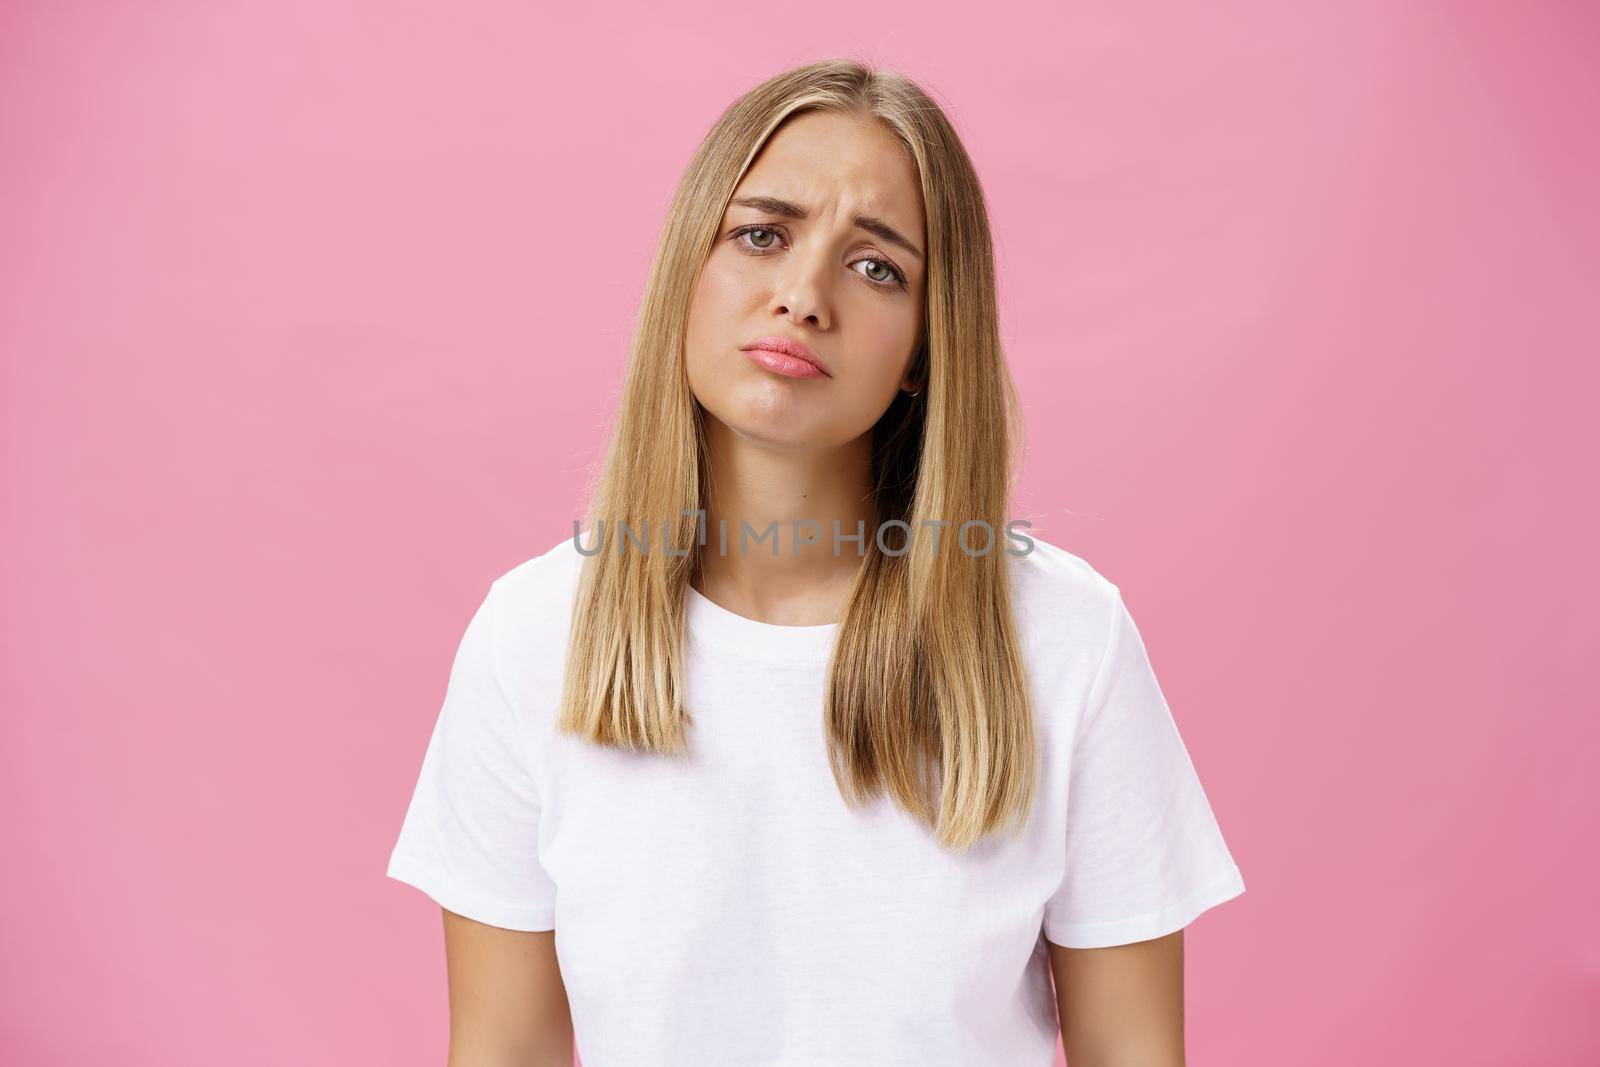 Sad girl whining tilting head raising eyebrows in upset expression and pursing lips feeling disappointed and envy, regretting missed chance standing unhappy and moody over pink background. Emotions concept